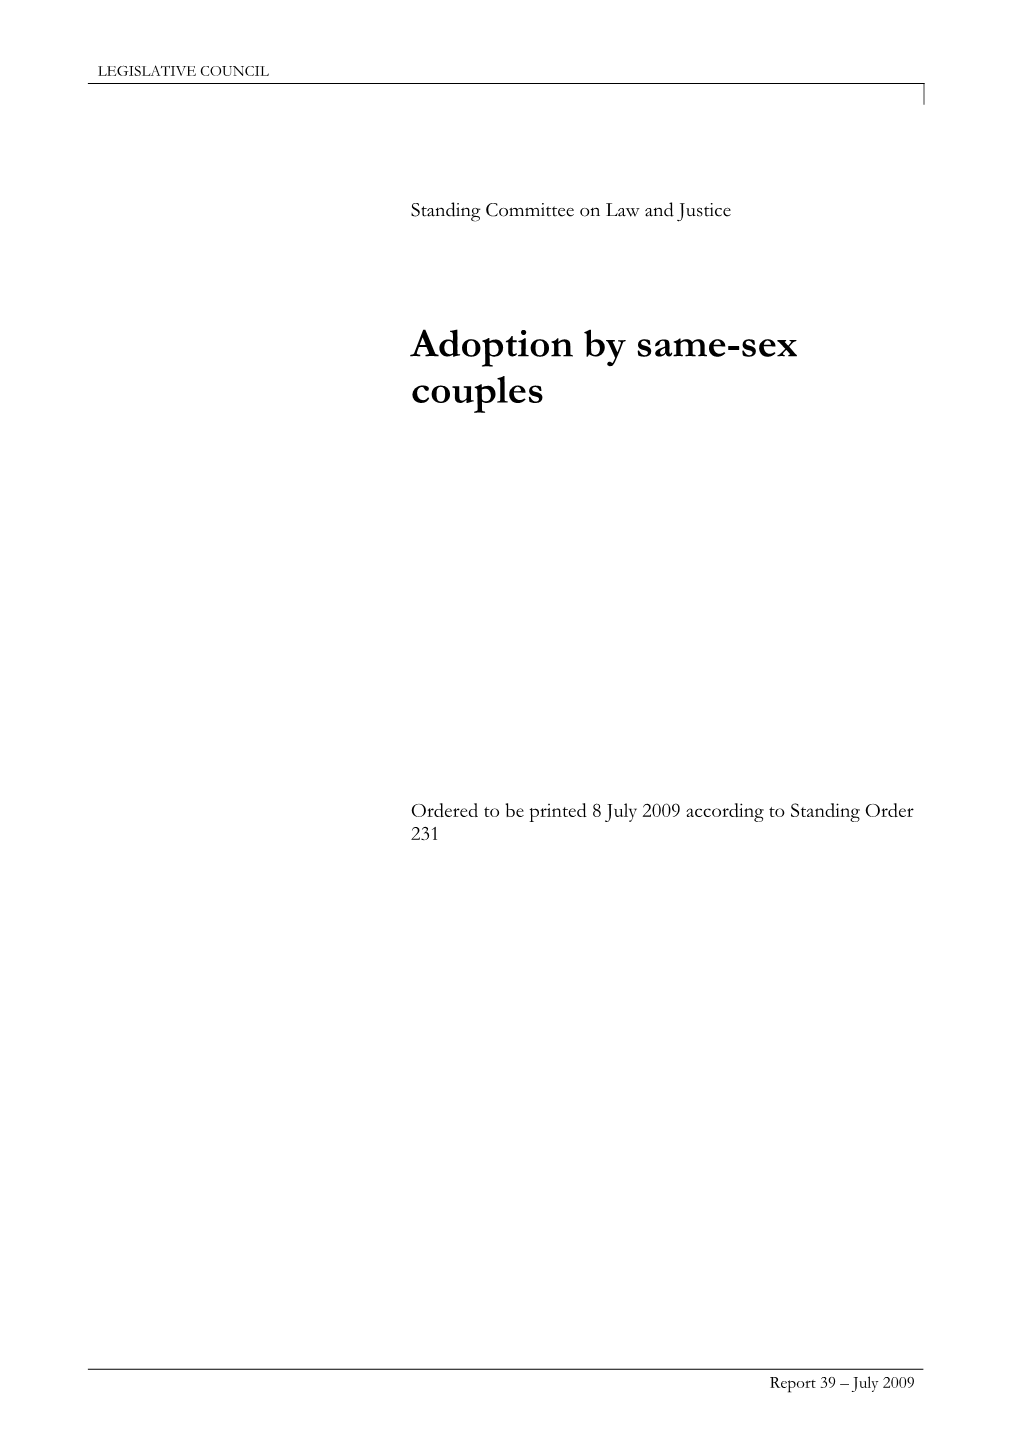 Adoption by Same-Sex Couples